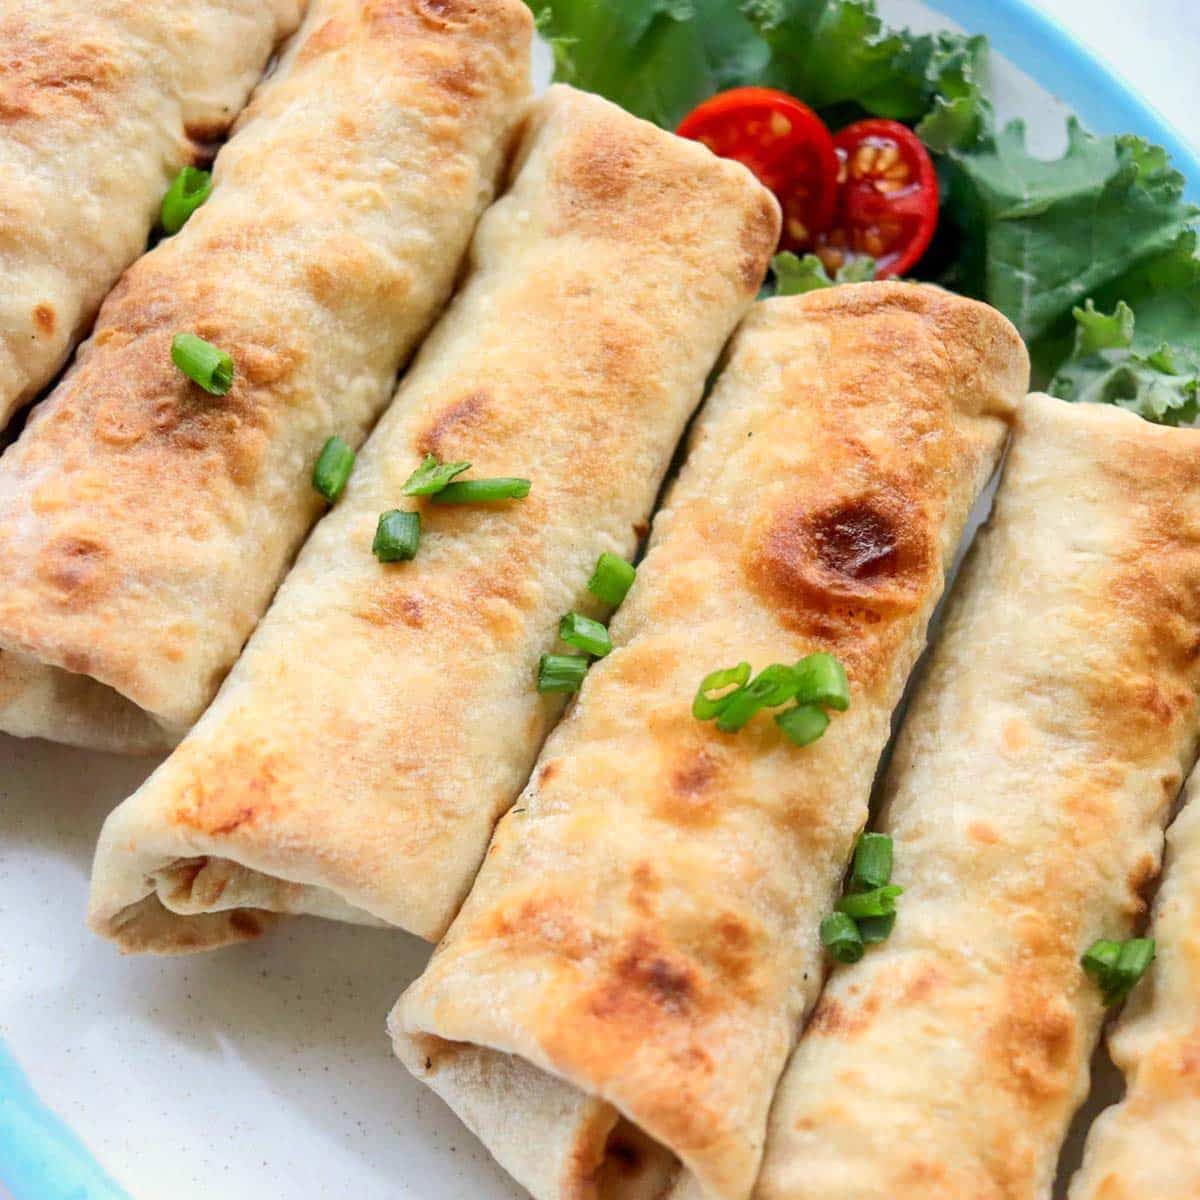 Thumbnail of low calorie chicken chimichangas.